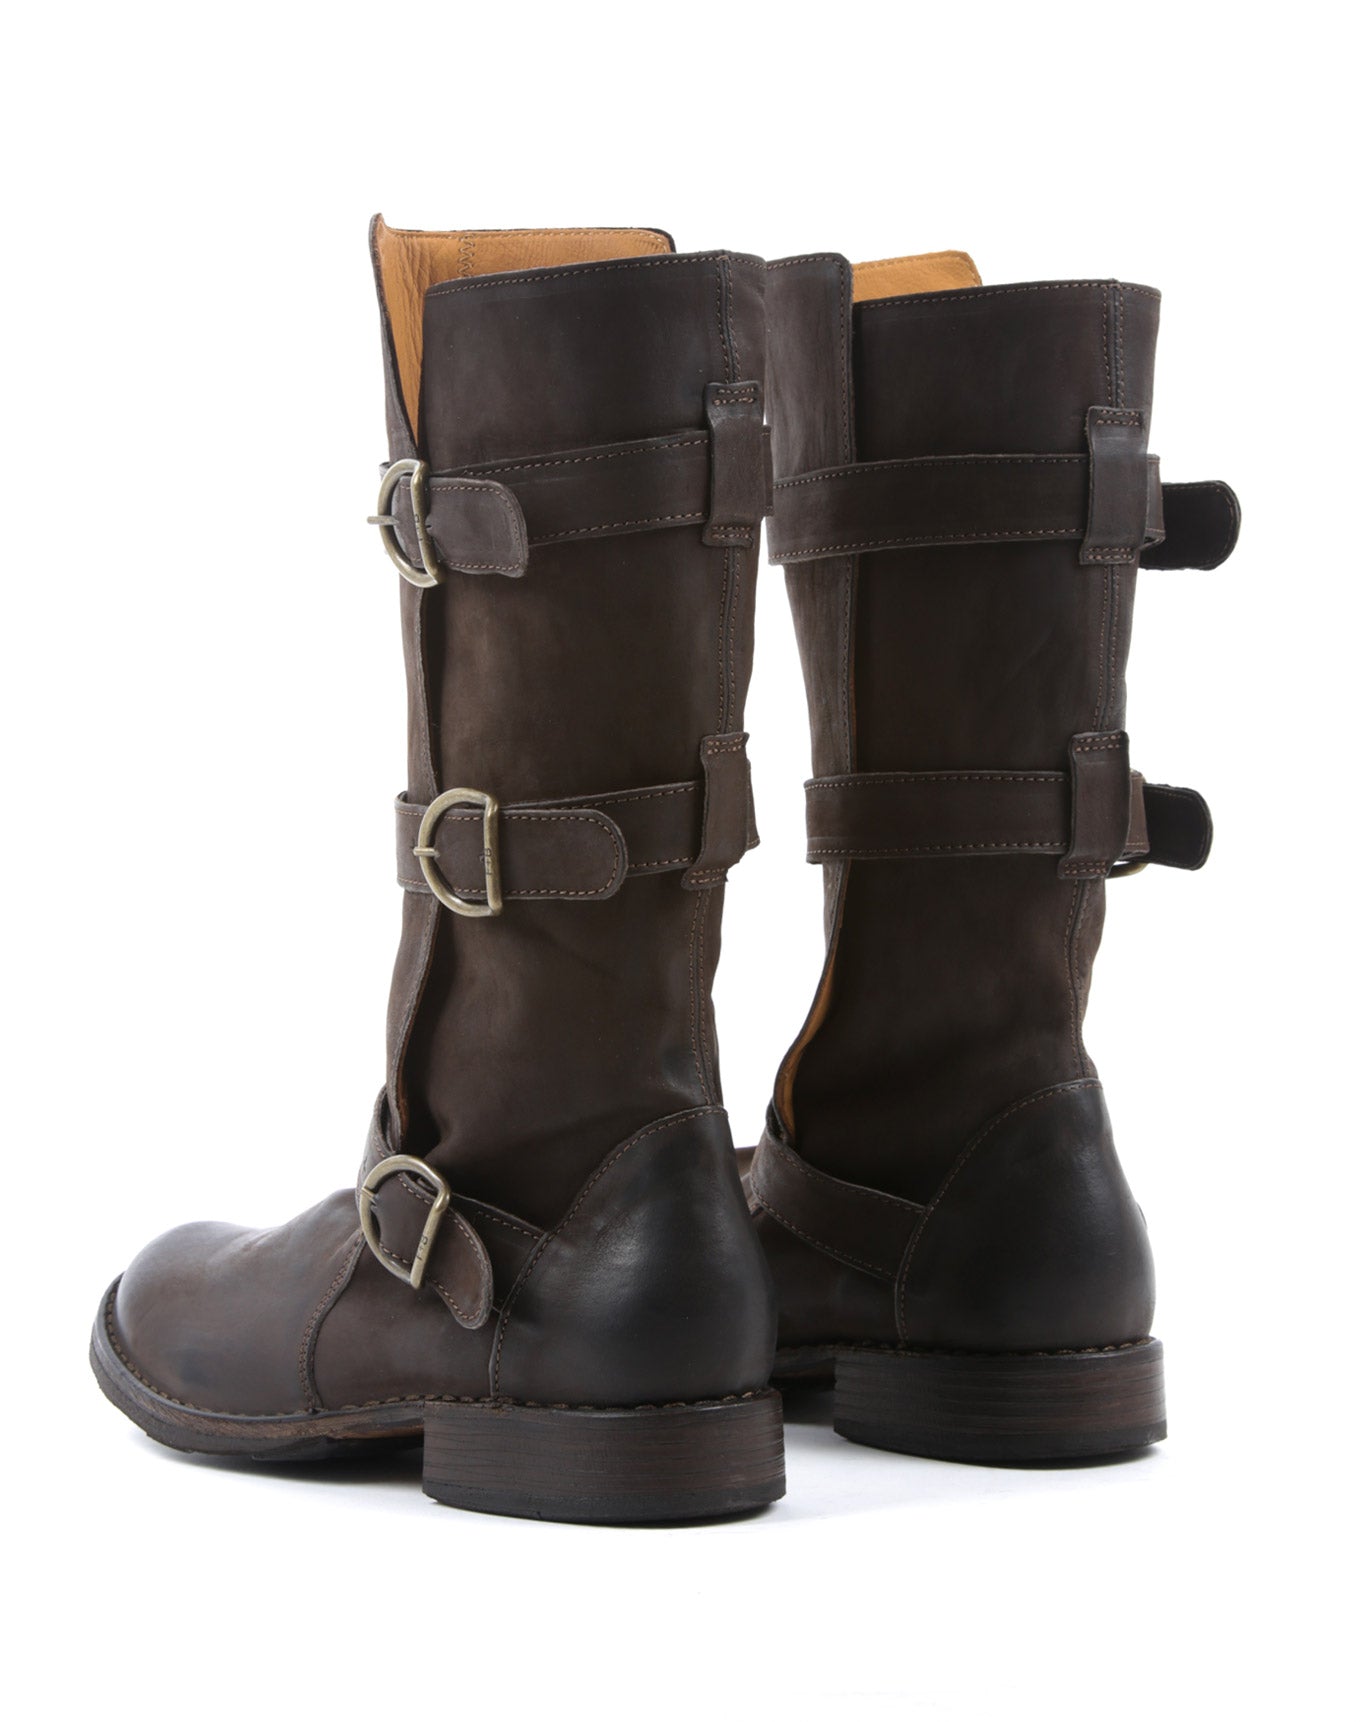 Fiorentini + Baker, ETERNITY 7040, 3 buckles iconic biker boot one of the best-selling signature styles of the brand. Handcrafted by skilled artisans. Made in Italy. Made to last.